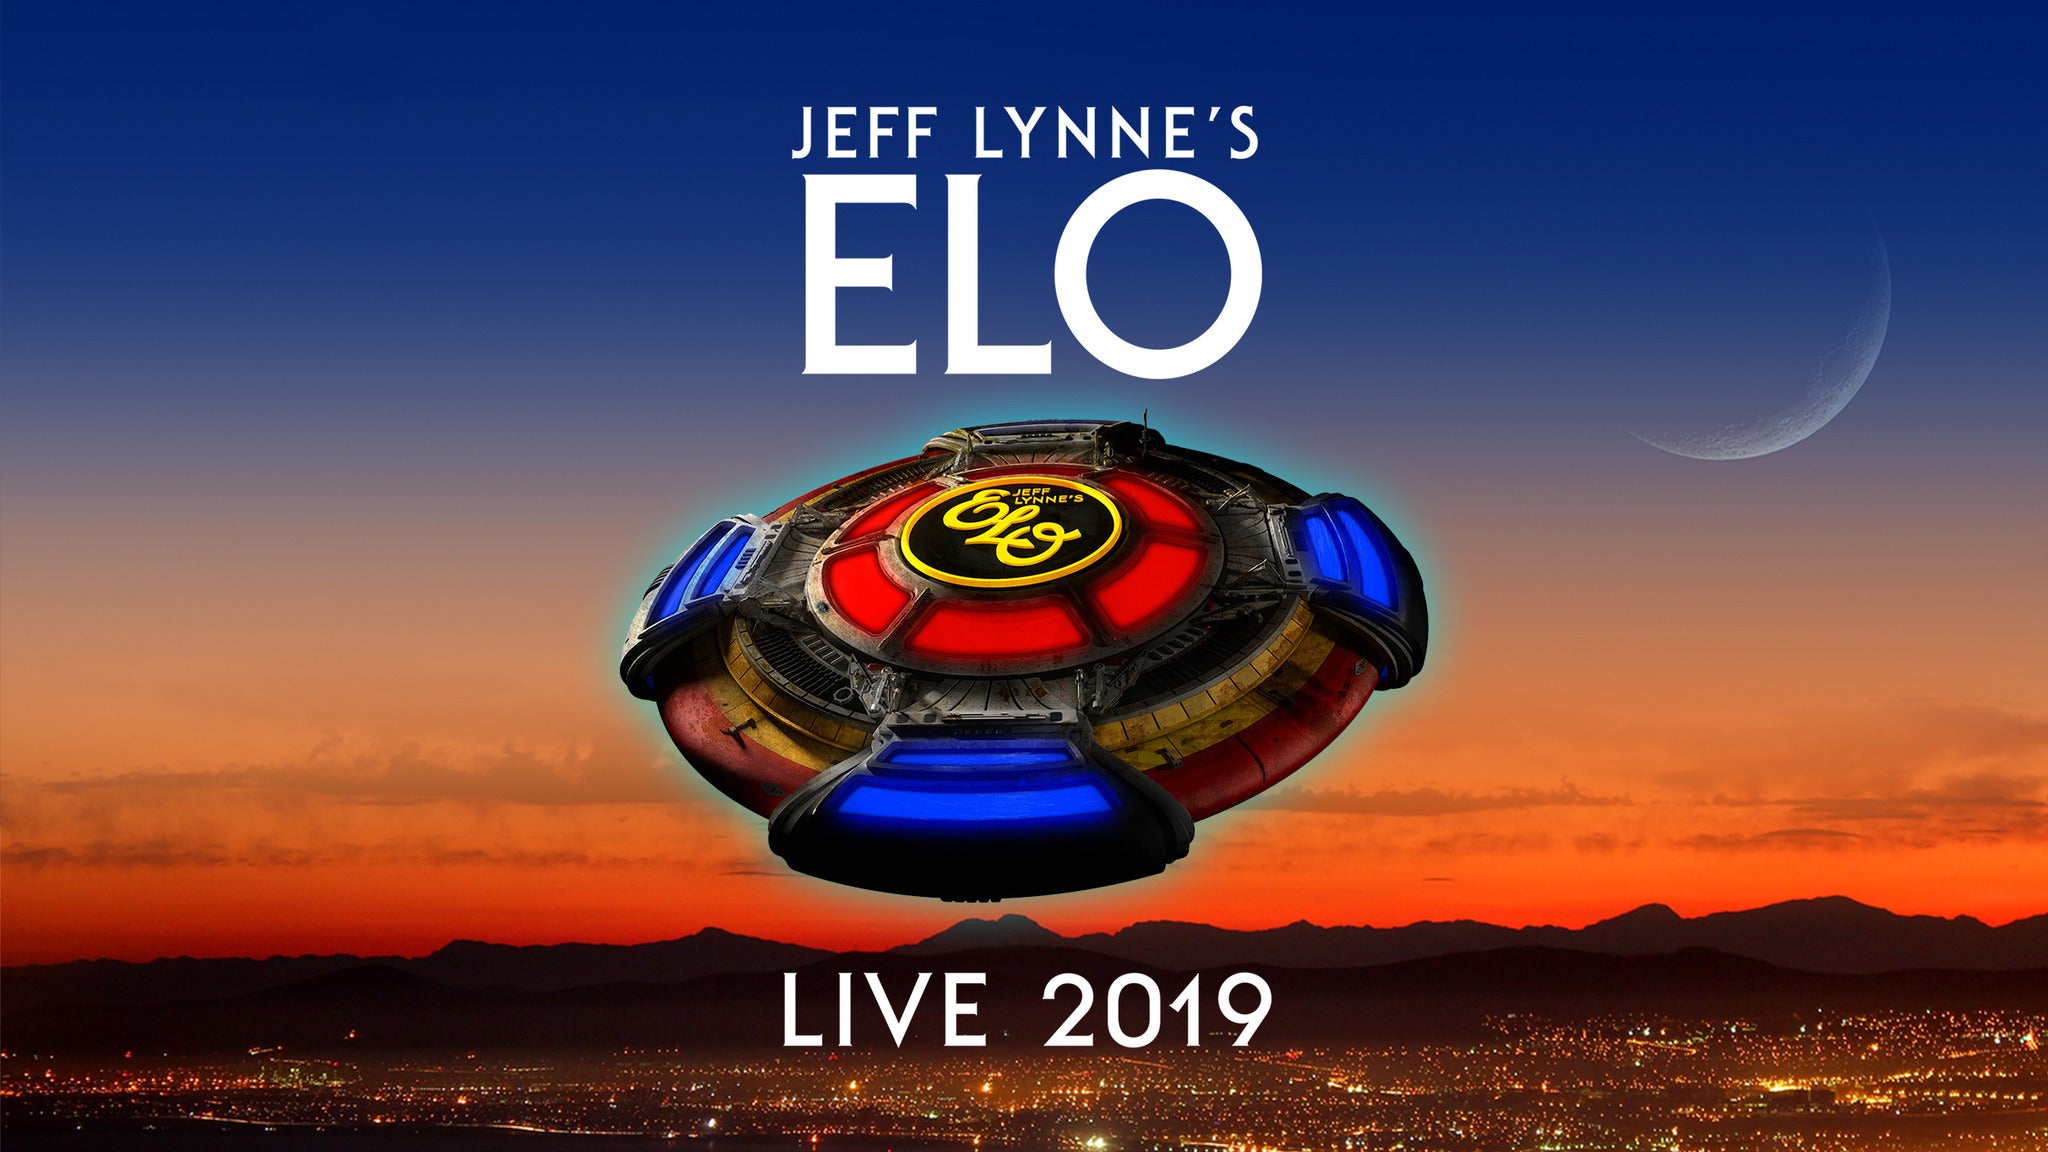 Jeff Lynne's ELO with special guest Dhani Harrison in Newark promo photo for Live Nation Mobile App presale offer code